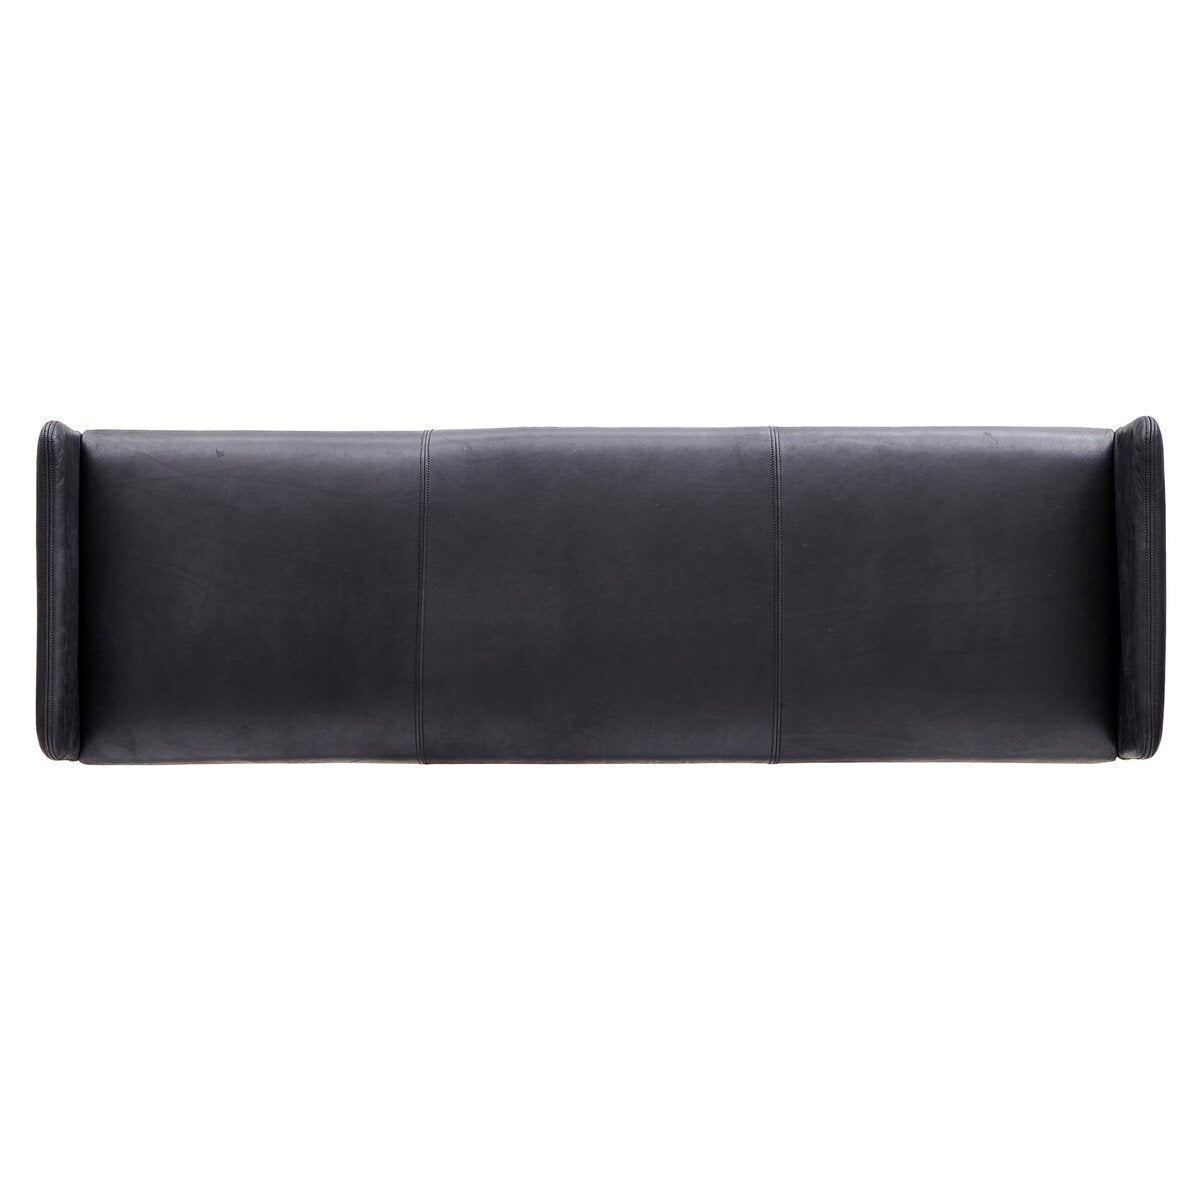 Dean Backless Bench